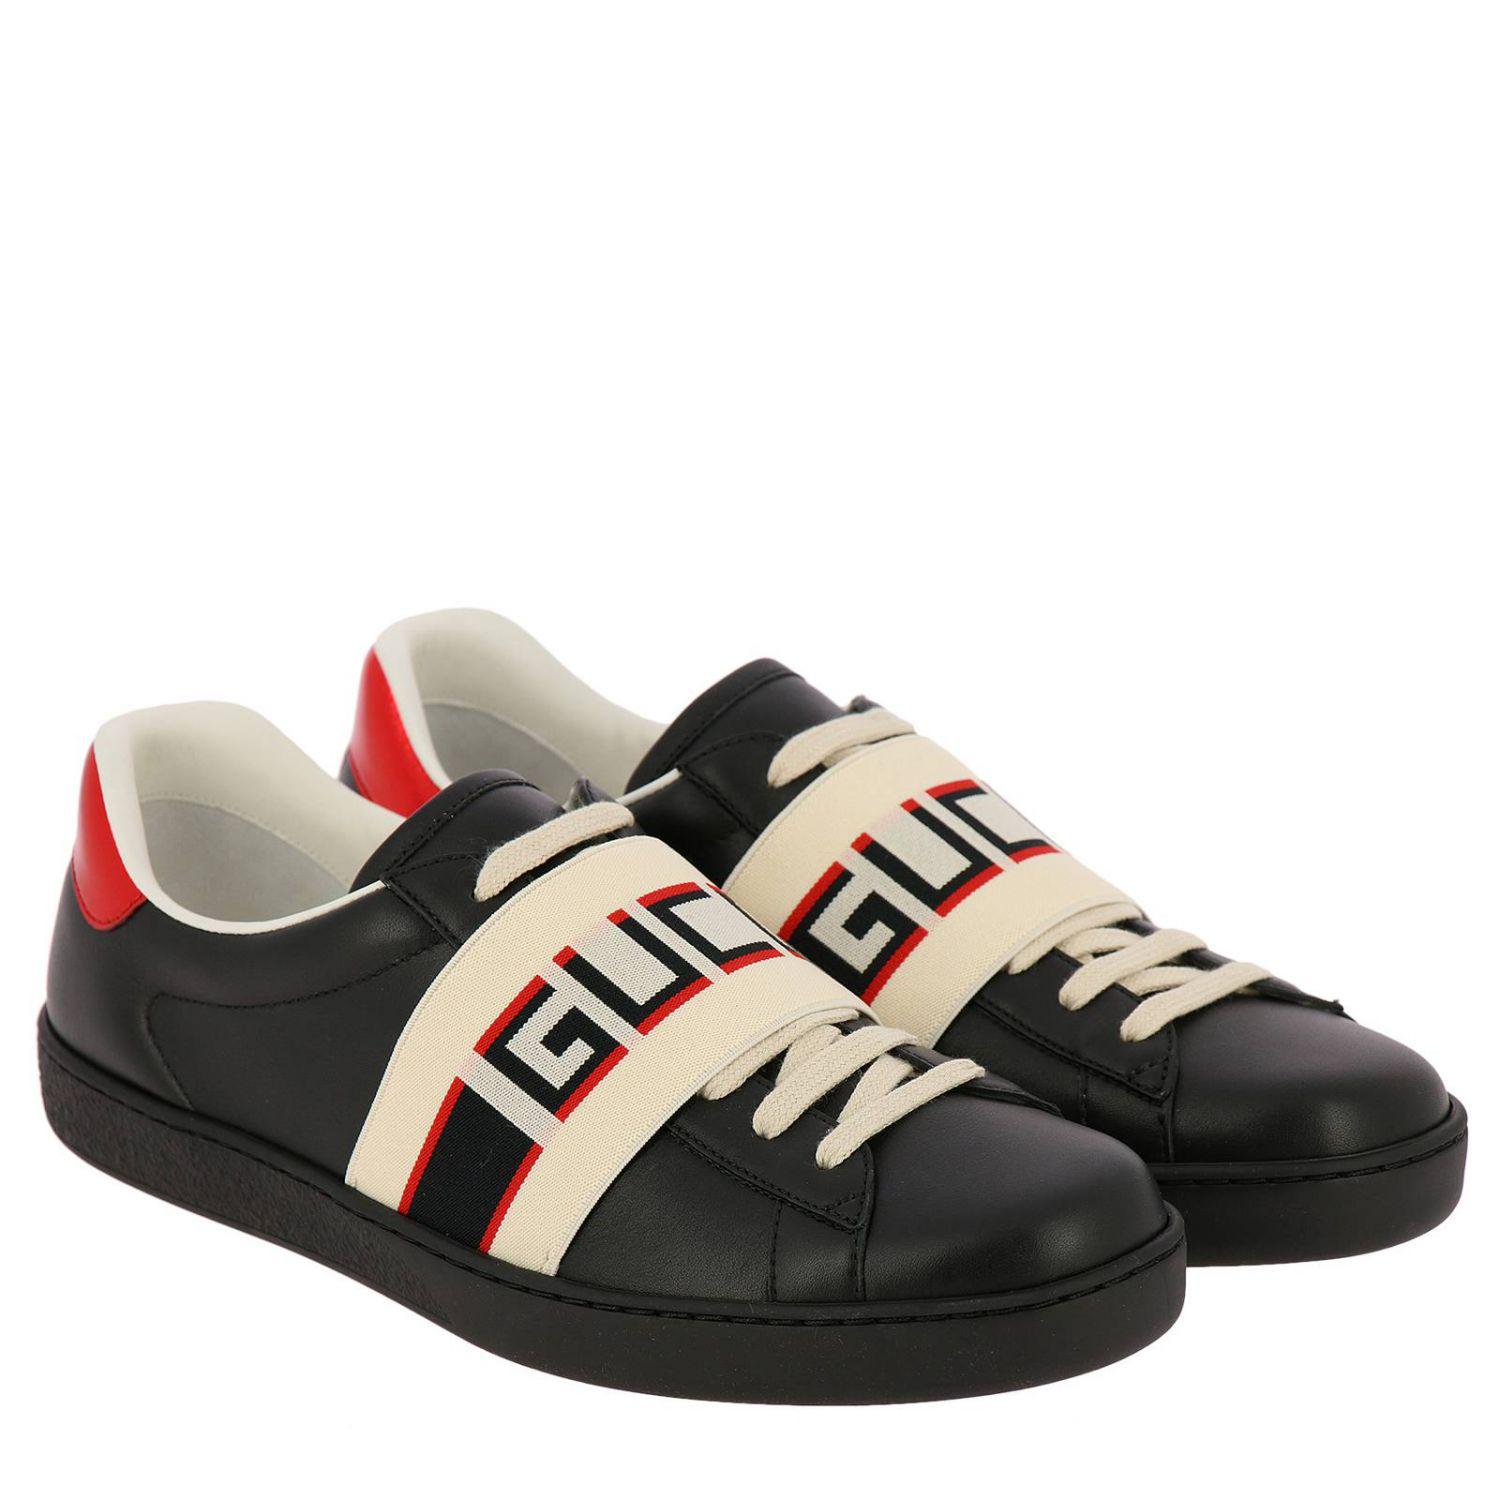 gucci black ace sneakers